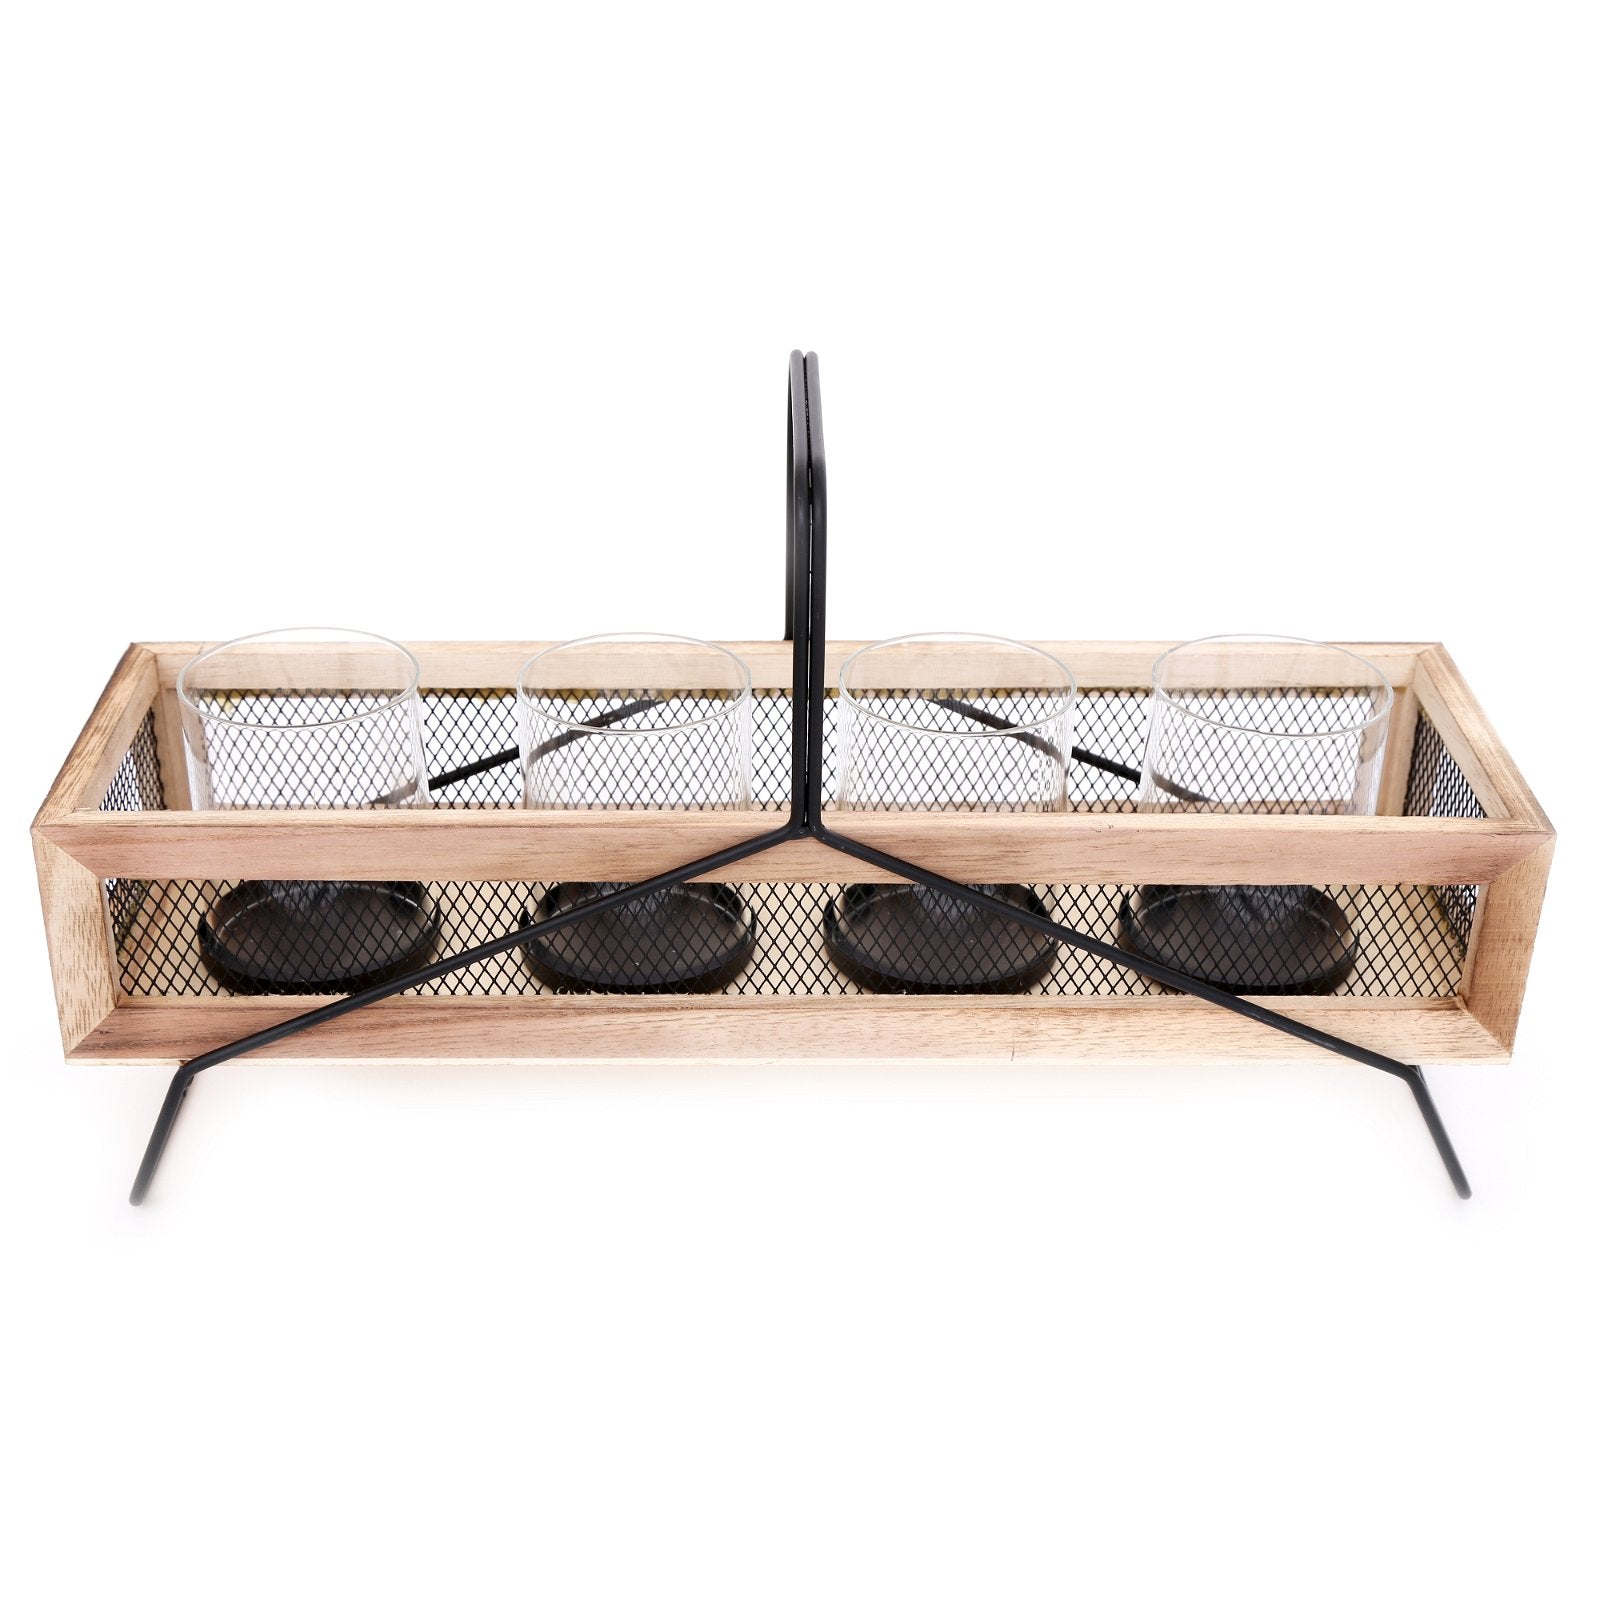 Four Piece Candle Holder in Wooden Display Tray - Kaftan direct